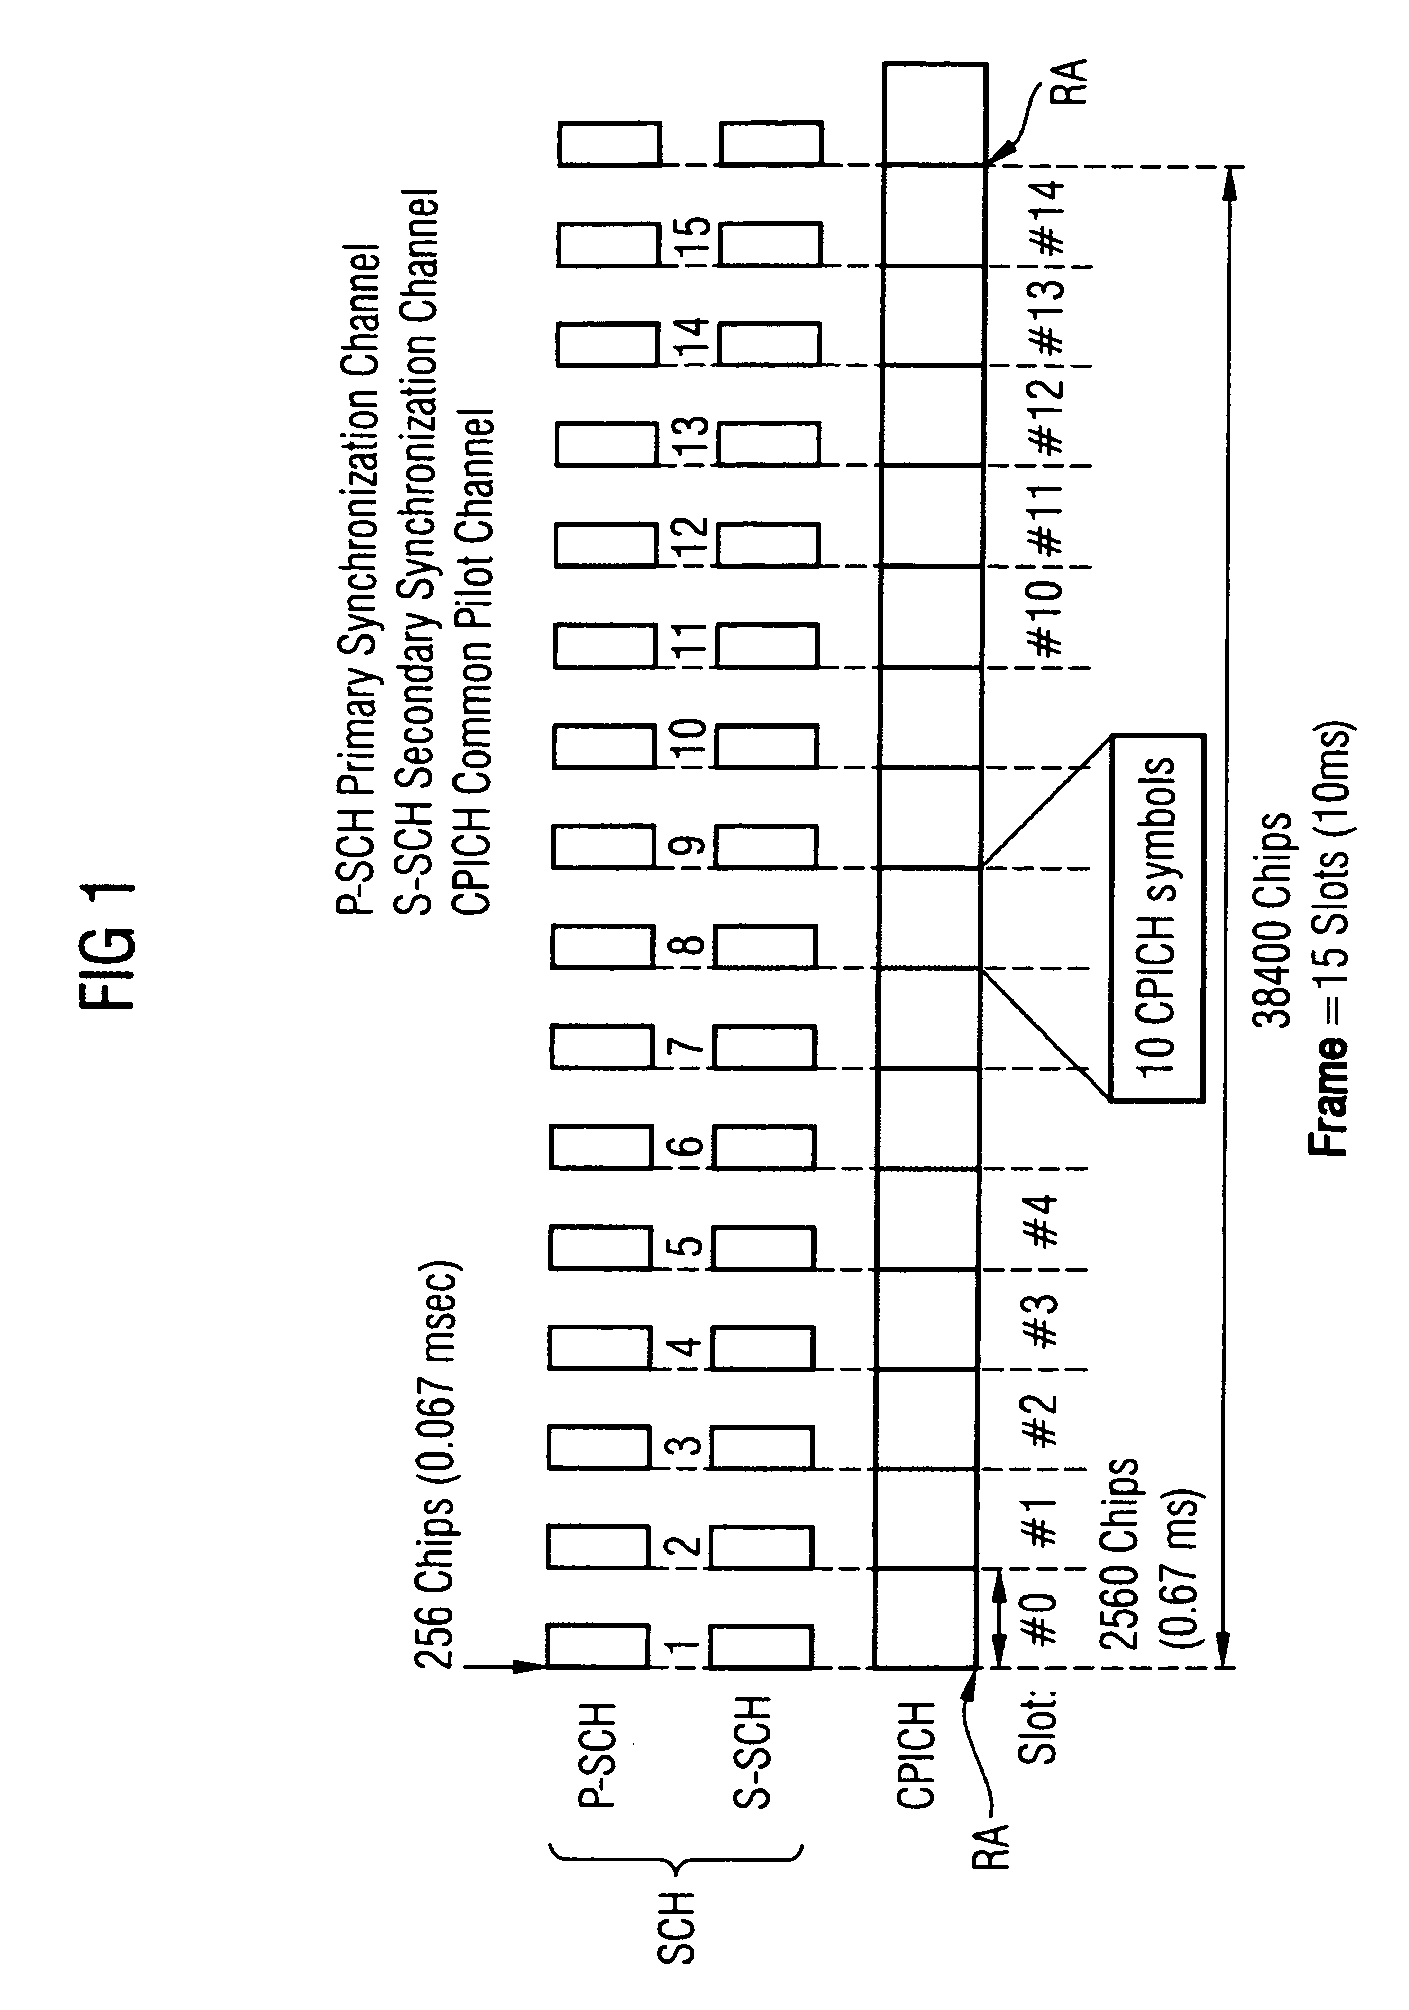 Method and apparatus for synchronization of a mobile radio receiver to a base station